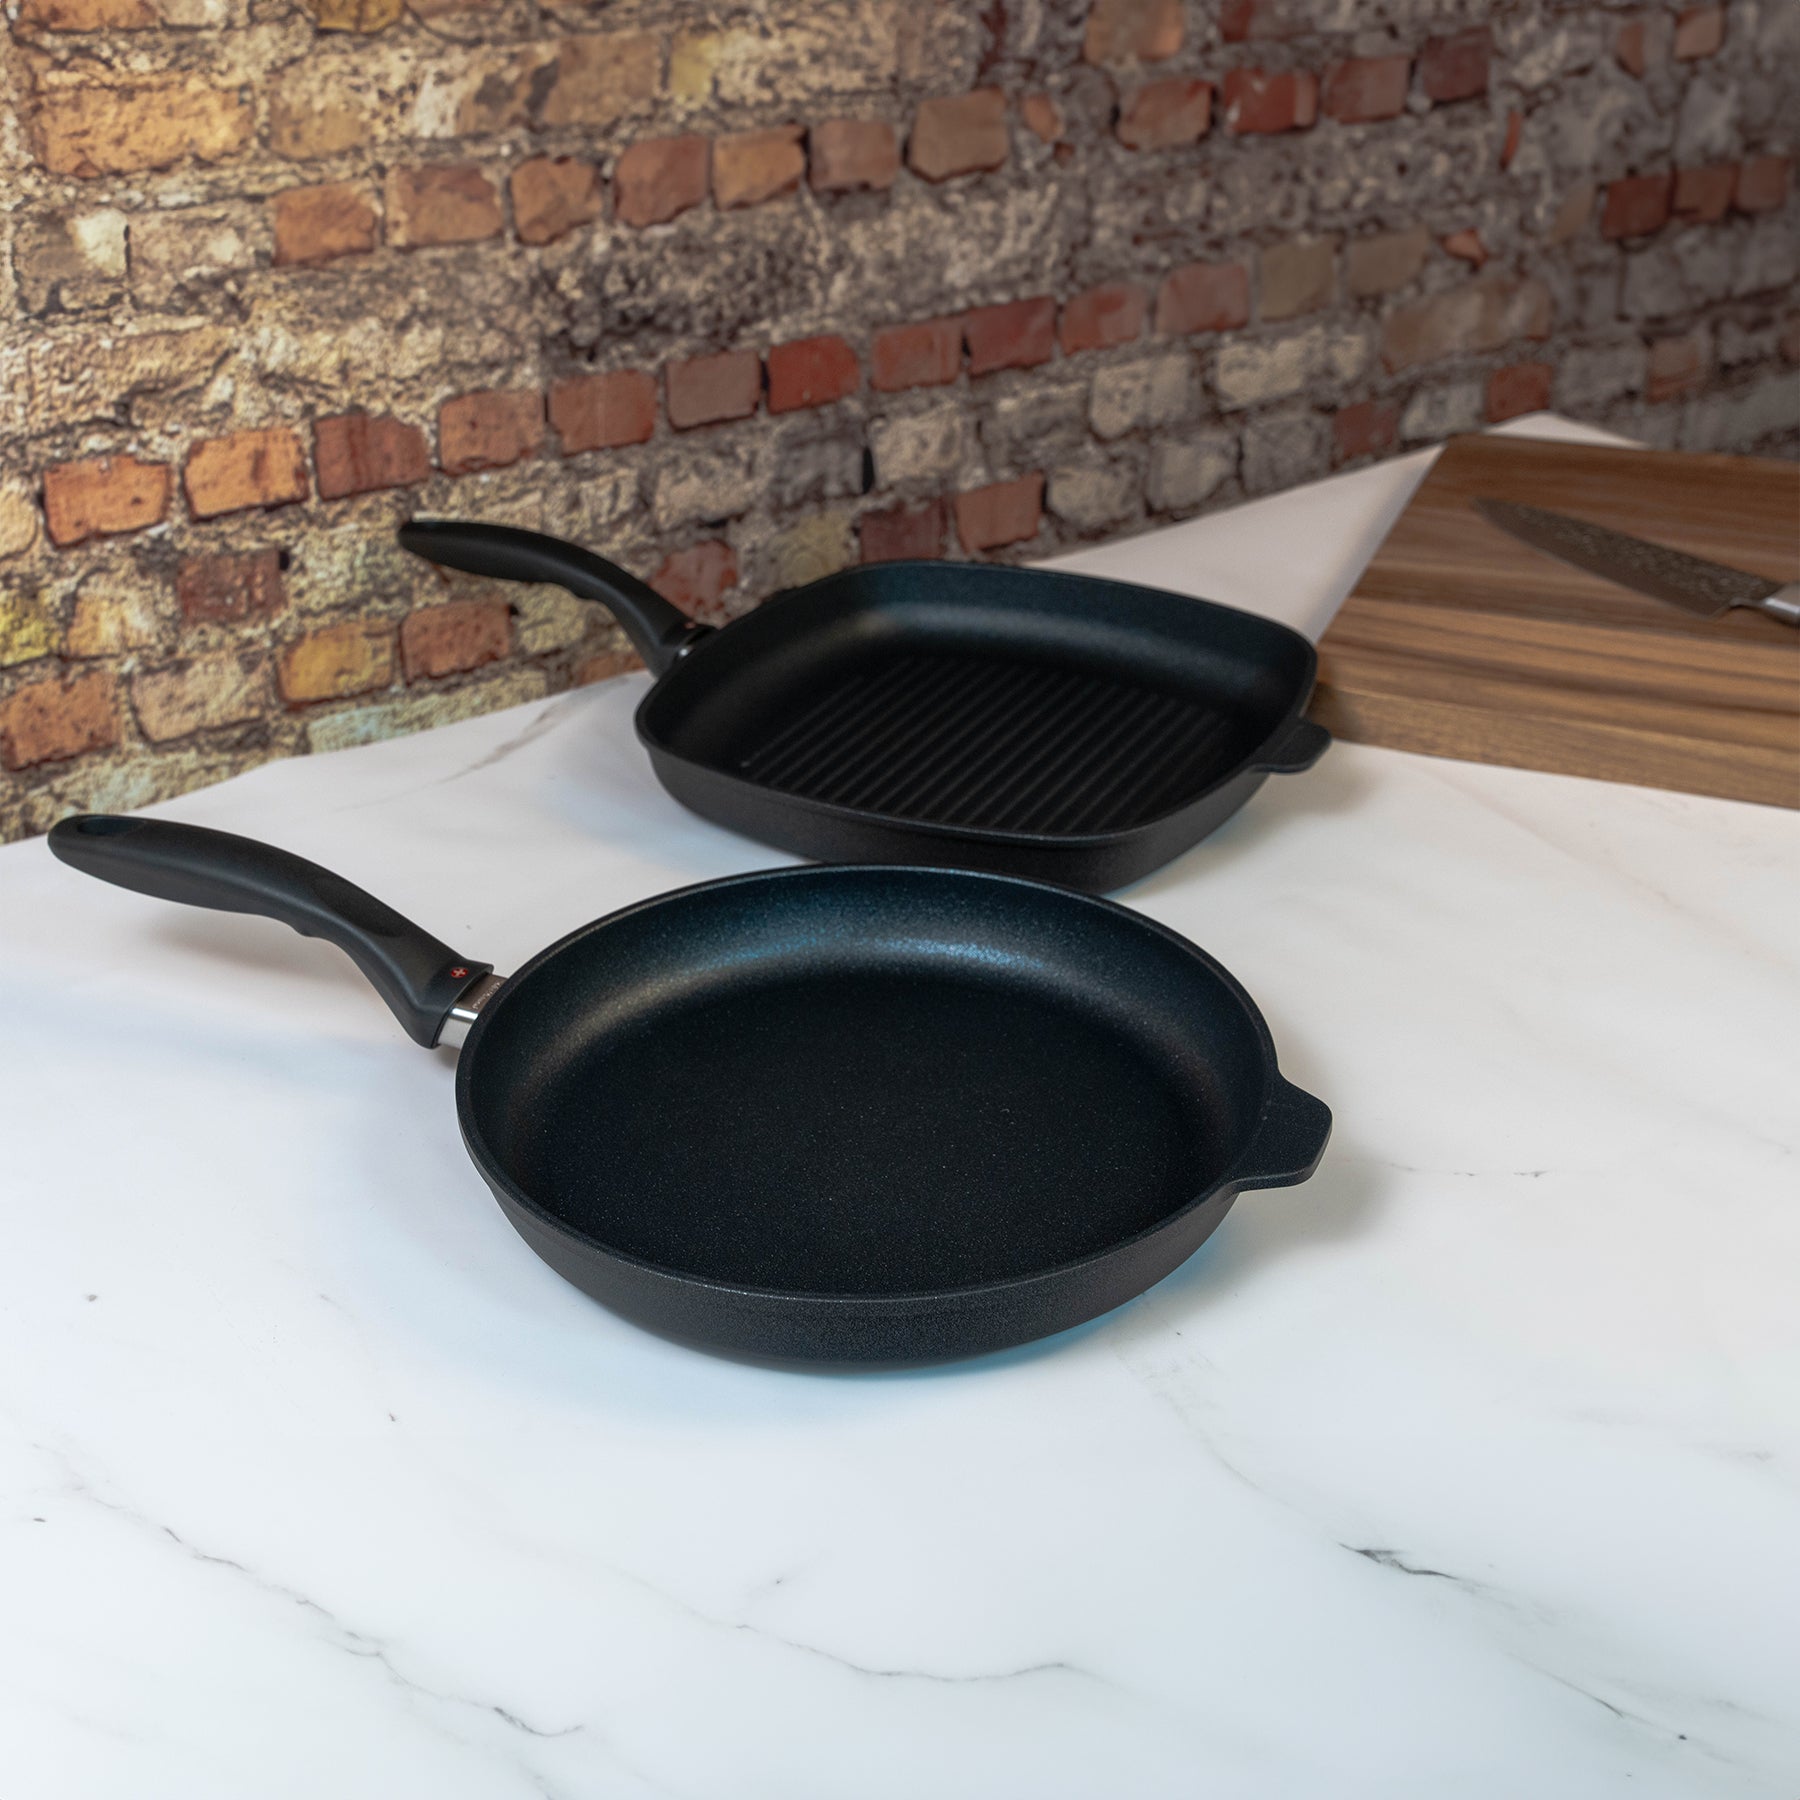 XD Nonstick 2-Piece Set - Fry Pan & Grill Pan in use on kitchen counter side view